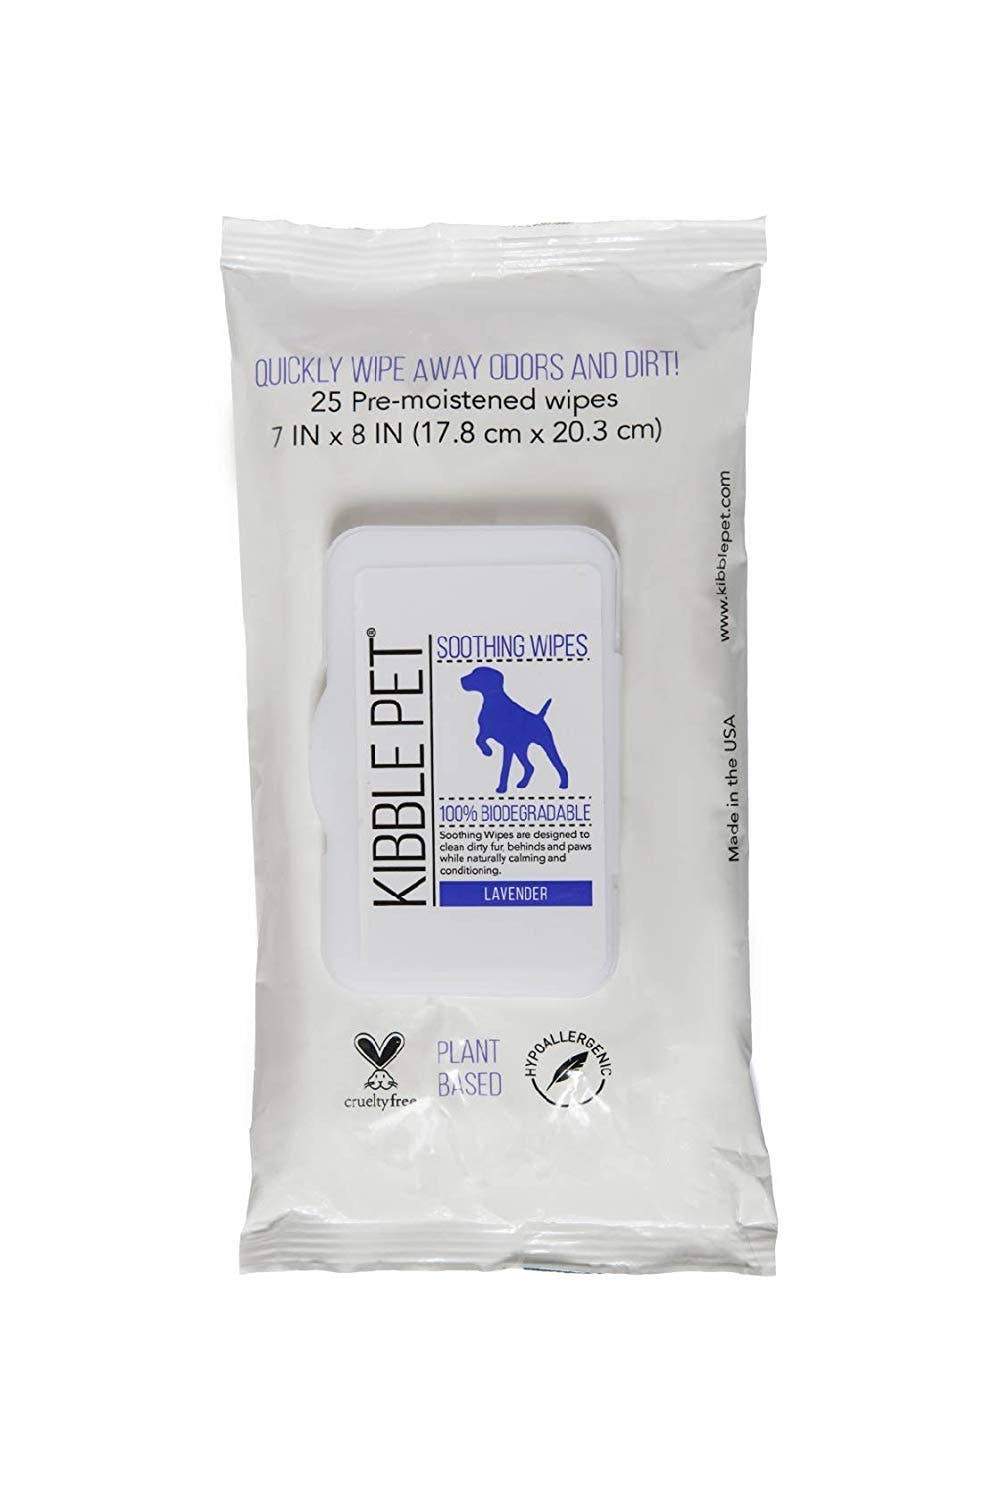 A package of Dr. Sniff - Soothing Lavender Wipes for Dogs, with 25 pre-moistened wipes indicated. It features icons for cruelty-free and plant-based, and a lavender scent is specified.